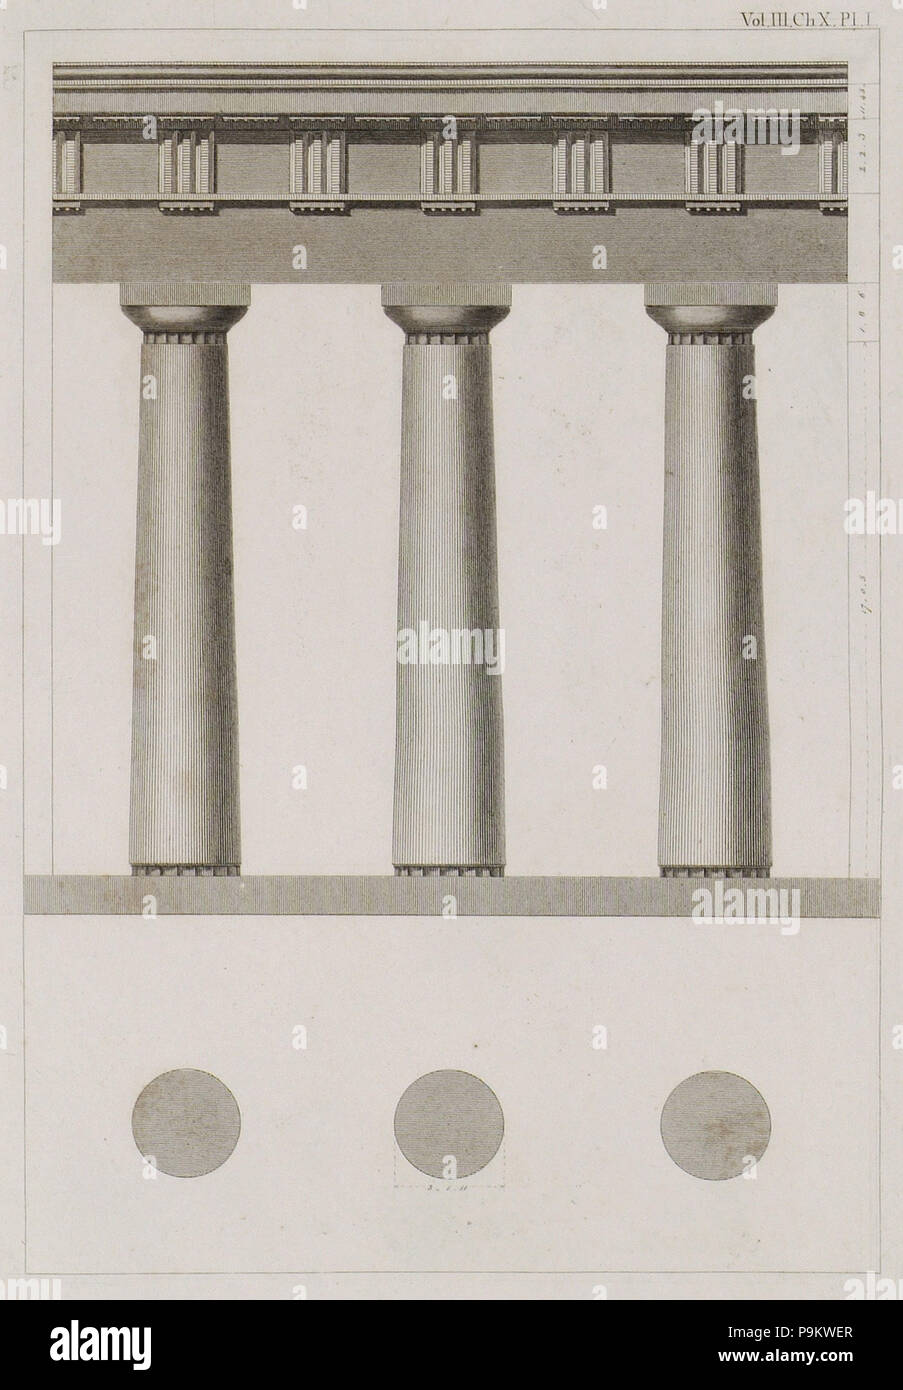 311 The plan and elevation of two Doric columns of the Temple of Apollo at Delos - Stuart James &amp; Revett Nicholas - 1794 Stock Photo